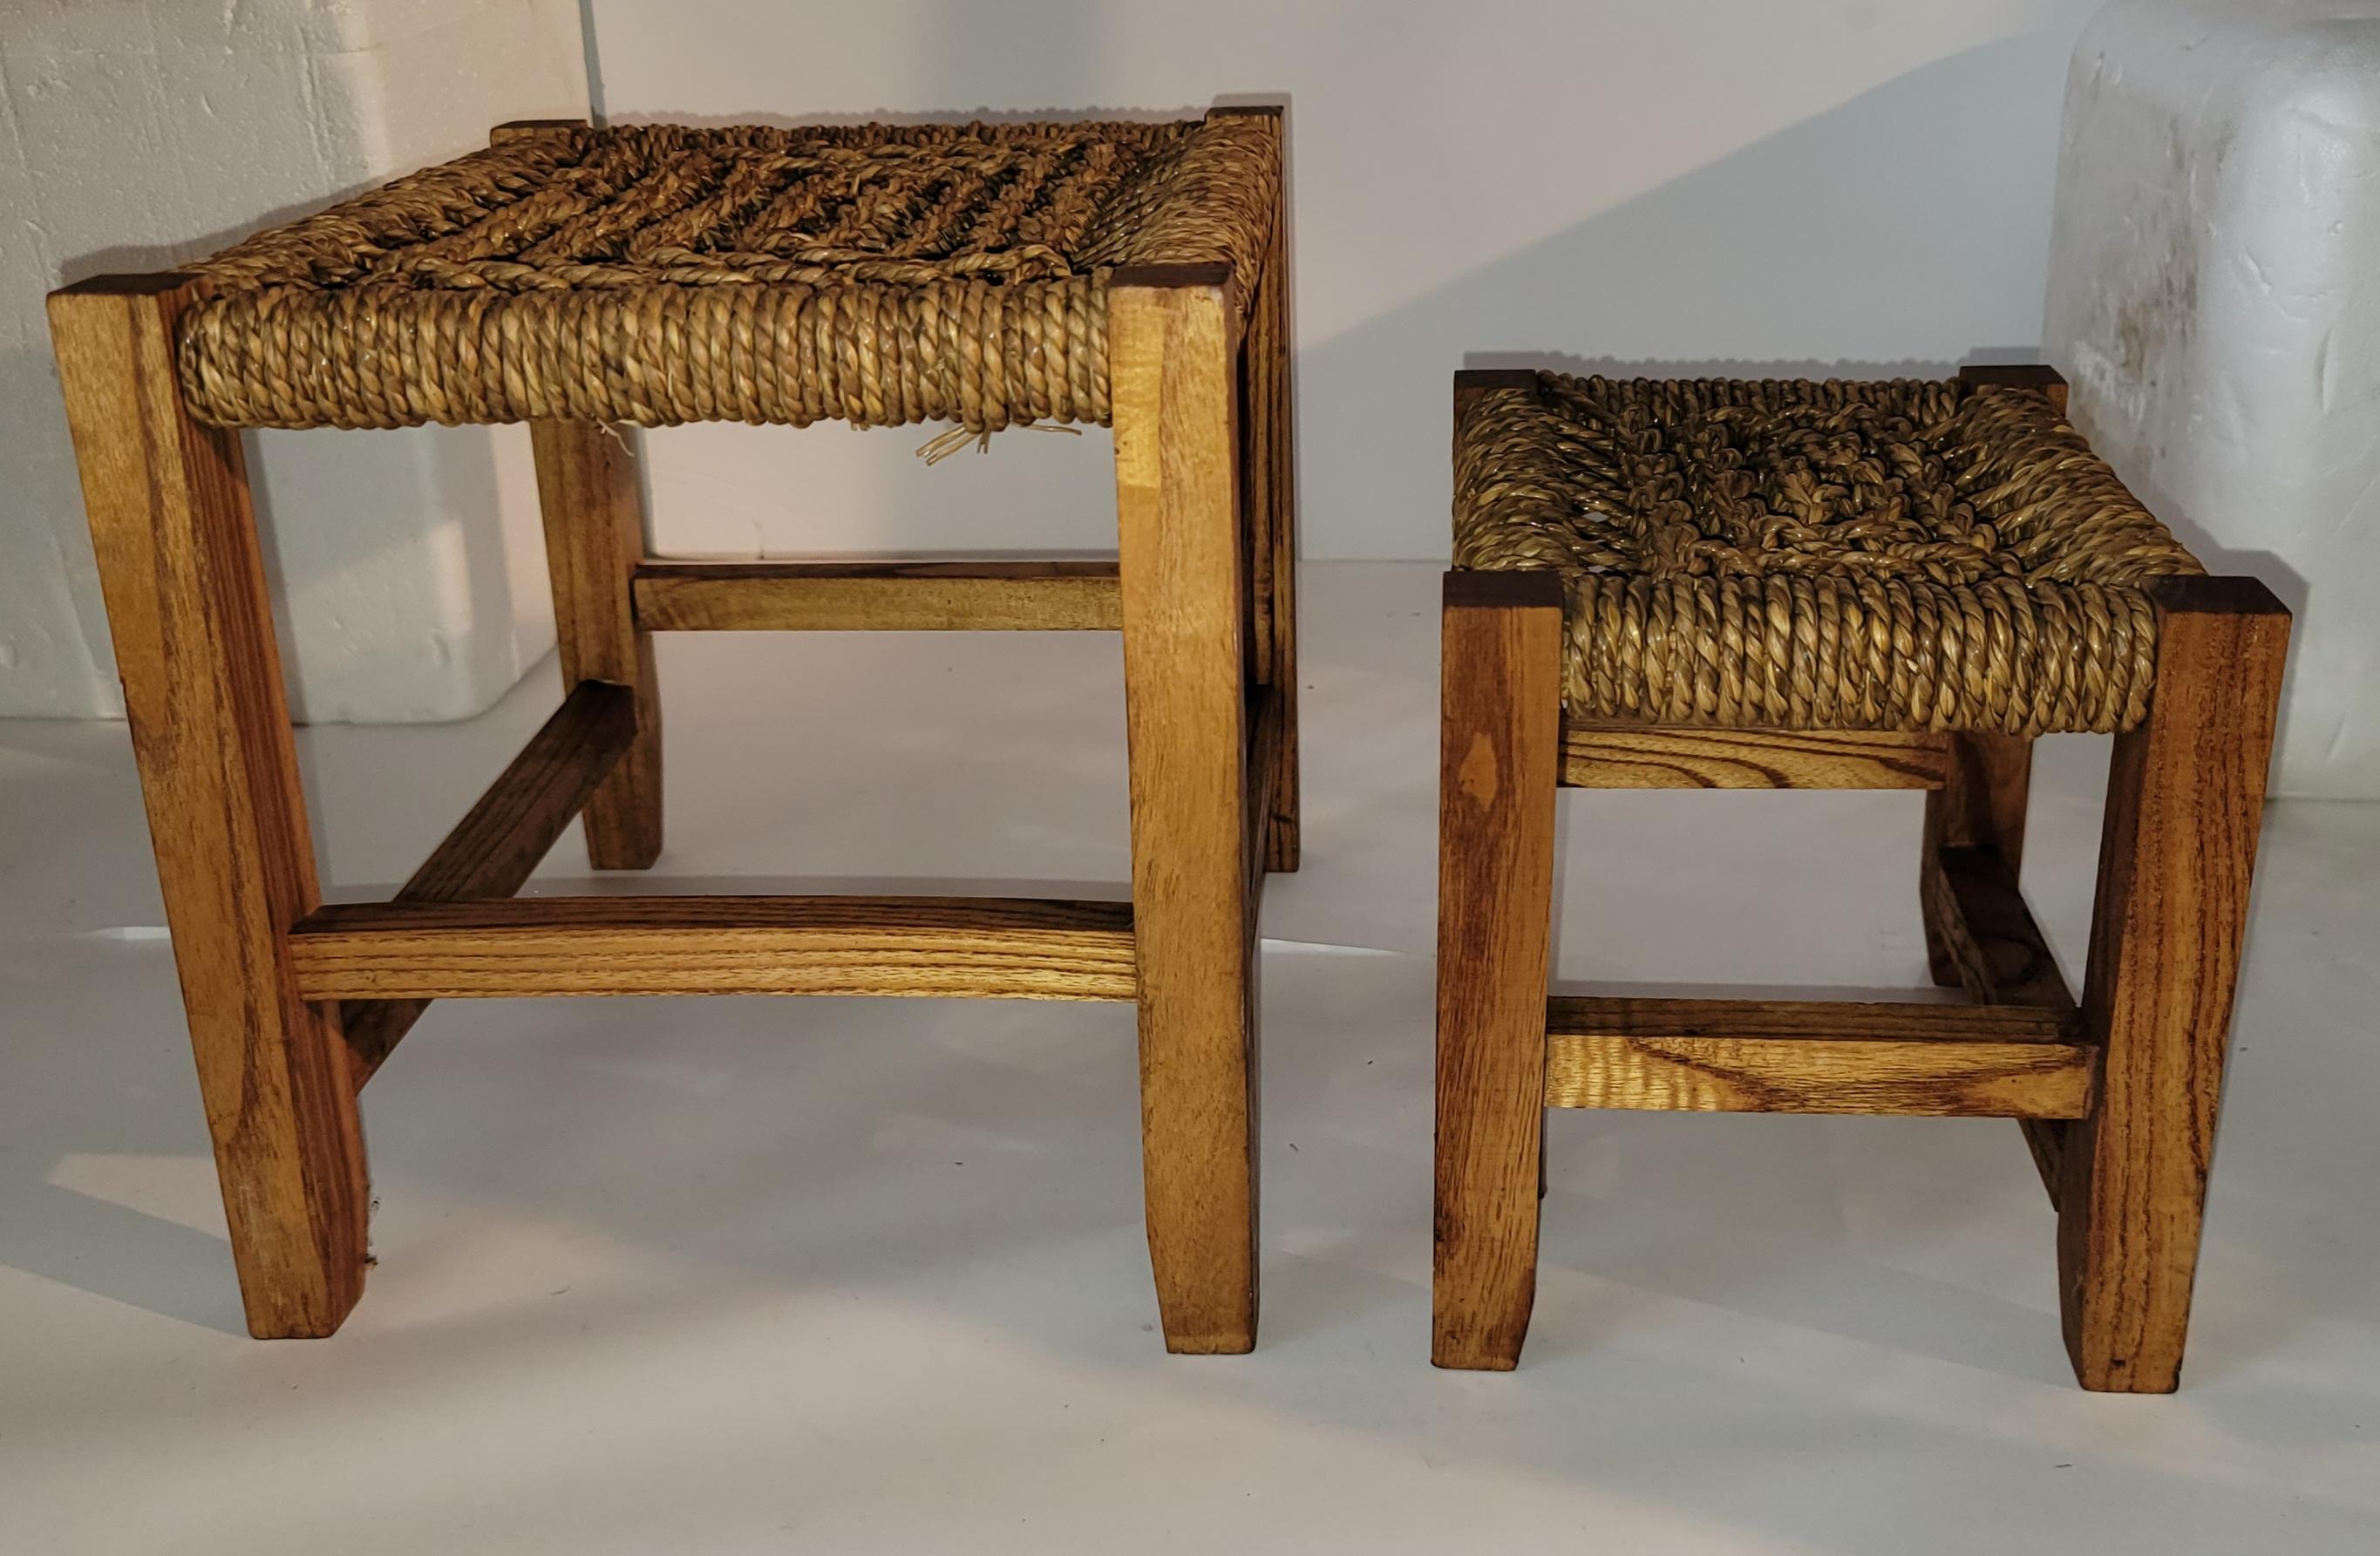 20th Century Seagrass Footstool - Pair For Sale